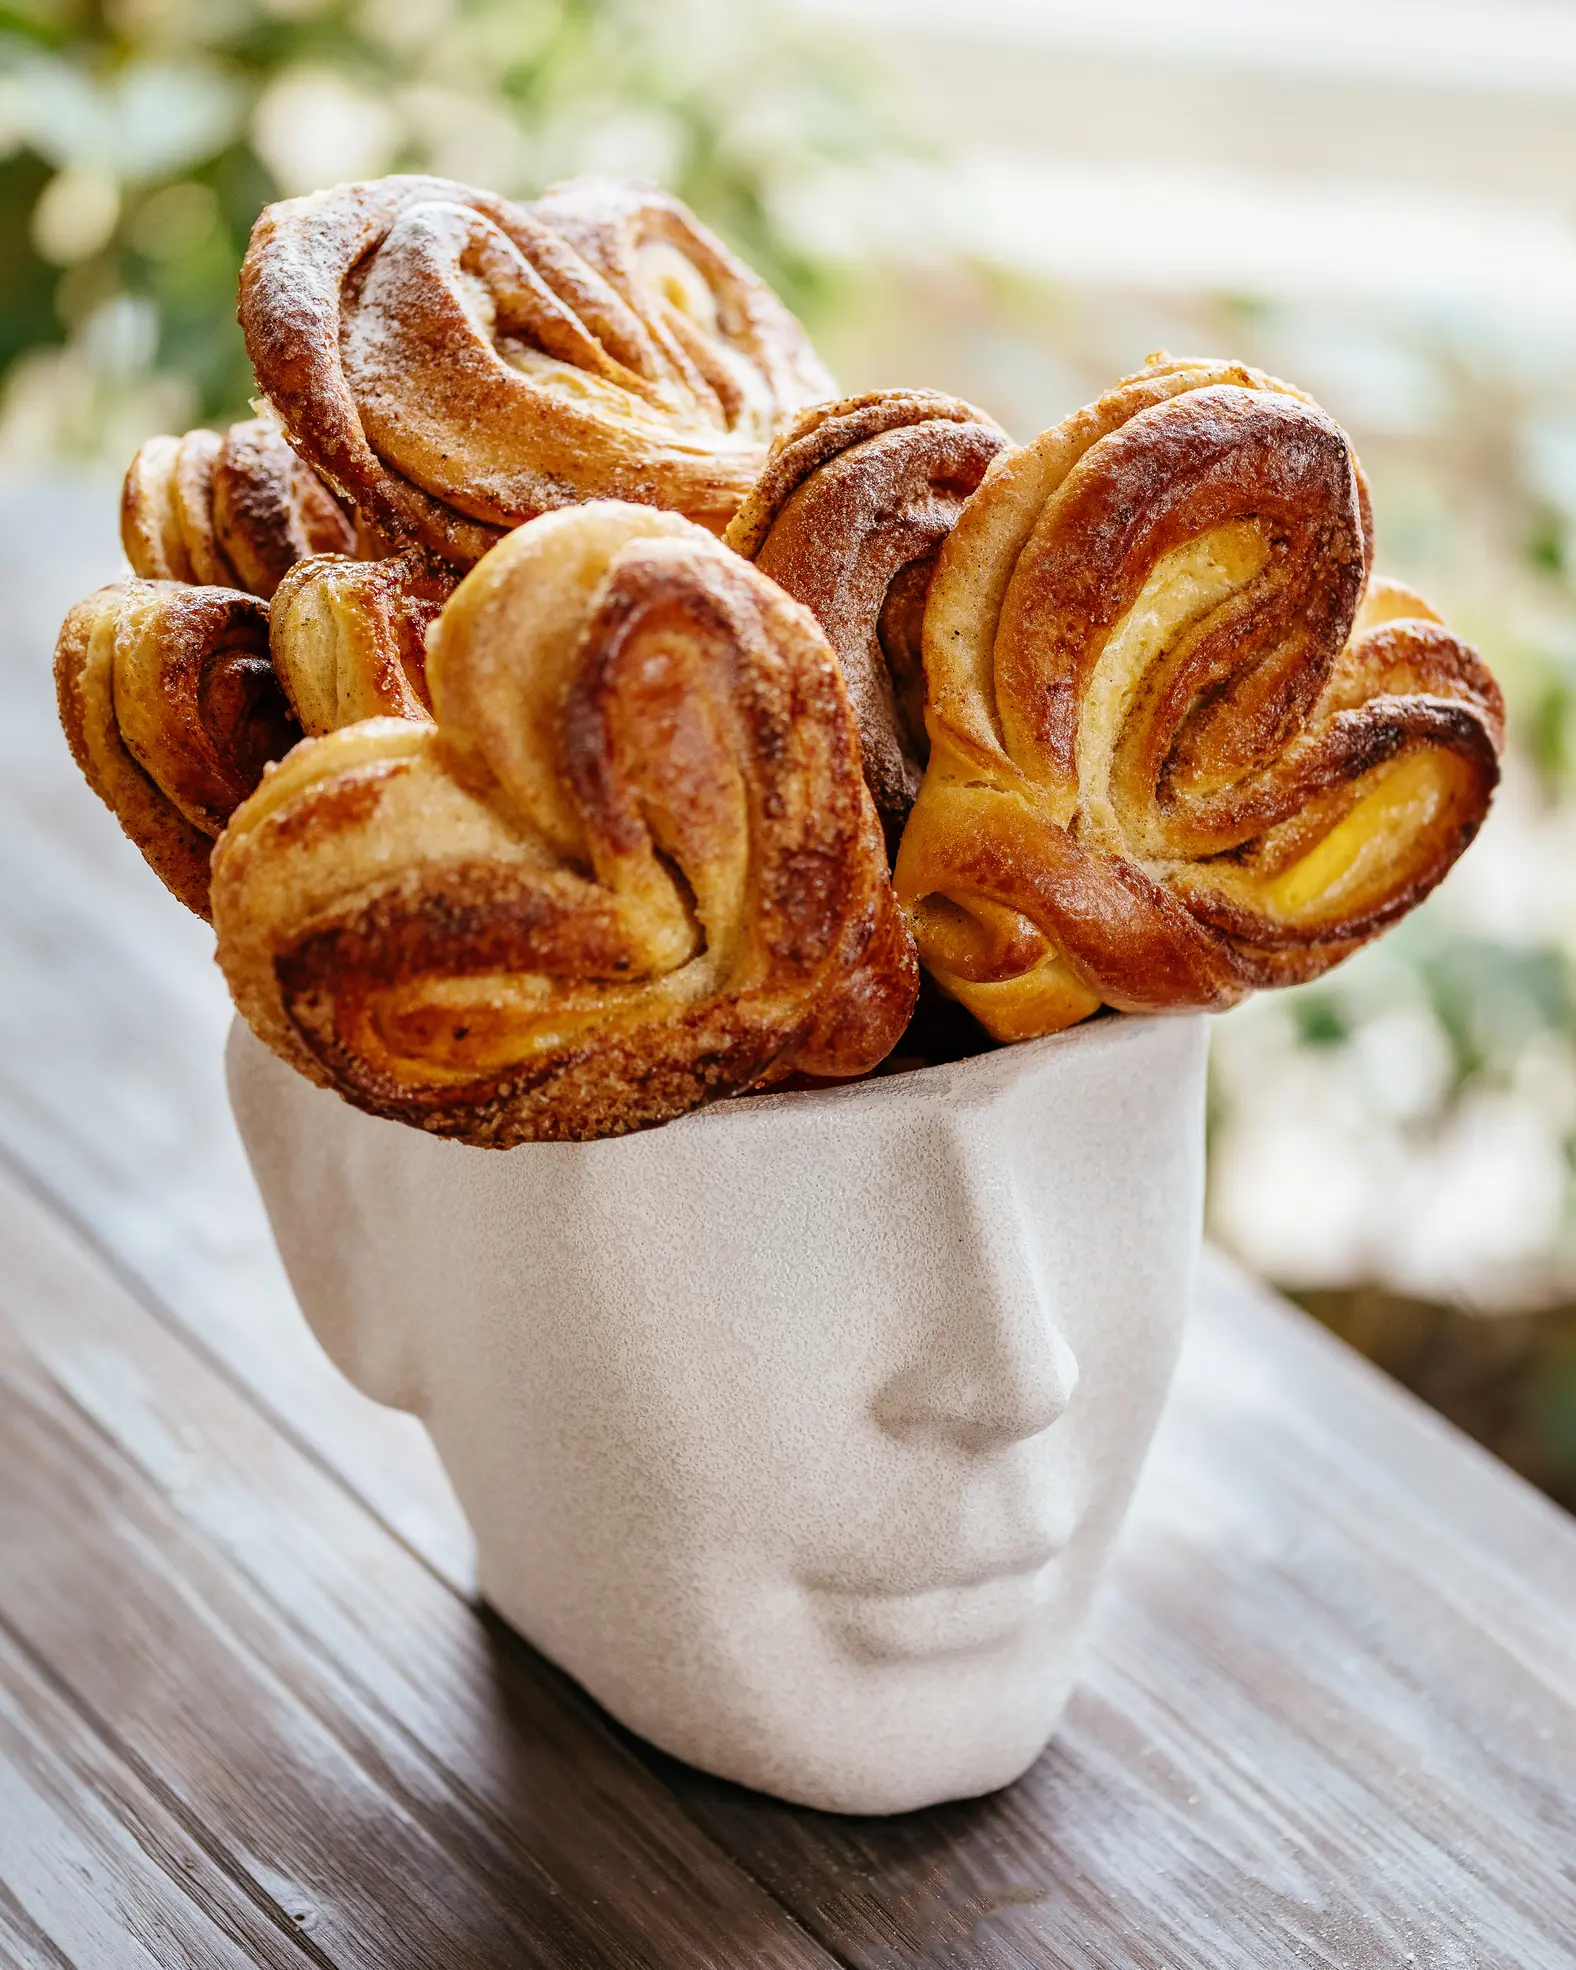 On a head-shaped plate are cinnamon rolls.  On a head-shaped plate are cinnamon rolls. The buns are made in the shape of hearts.